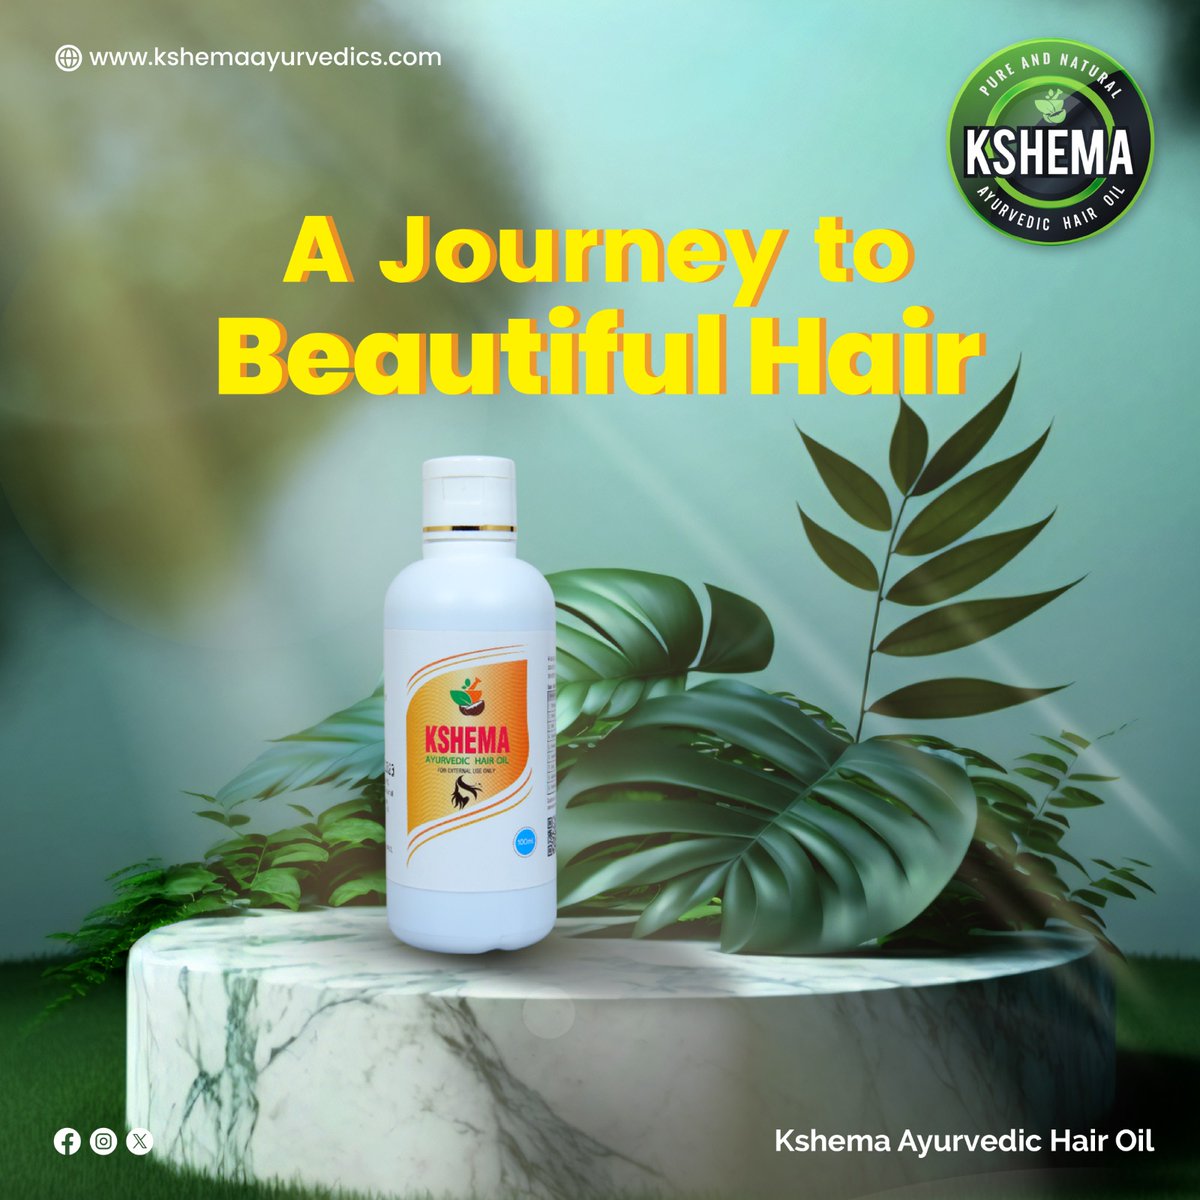 Elevate your haircare routine and let Kshema be your trusted companion on this enchanting journey. Say YES to vibrant hair days!

#naturalhairoil #kshemaayurvedics #kshemahairoil #hairproduct #dandrufffreehair #hairgrowth #kshemahairoil #naturaloil  #hairgrowth